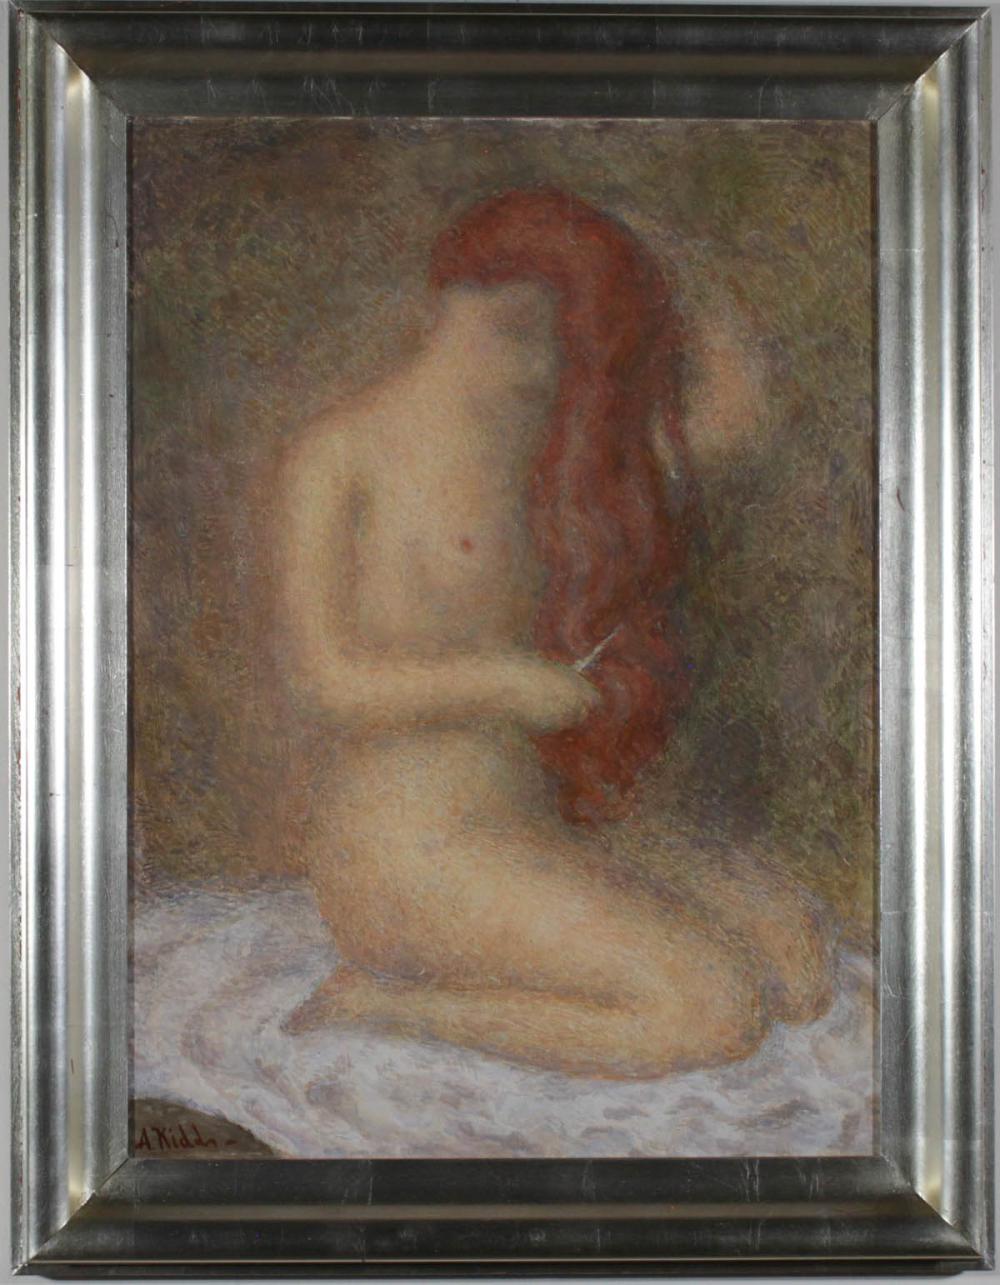 ATTRIBUTED TO ANATOLI KIDD OIL 2ee15d